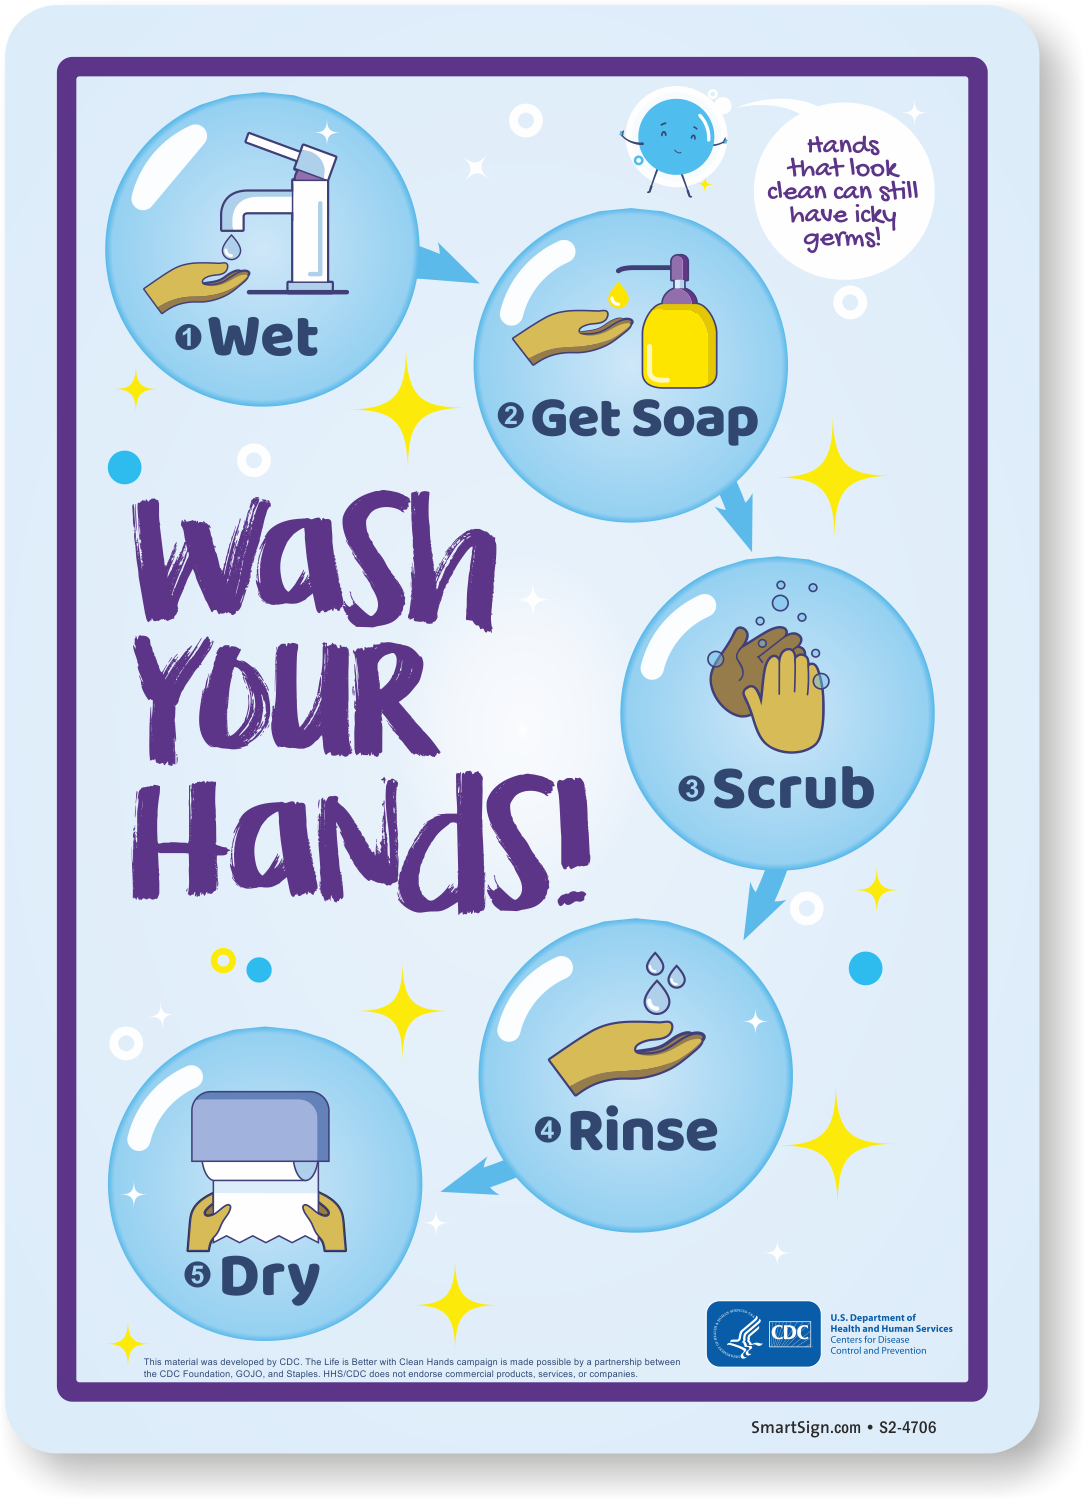 hand-washing-instruction-signs